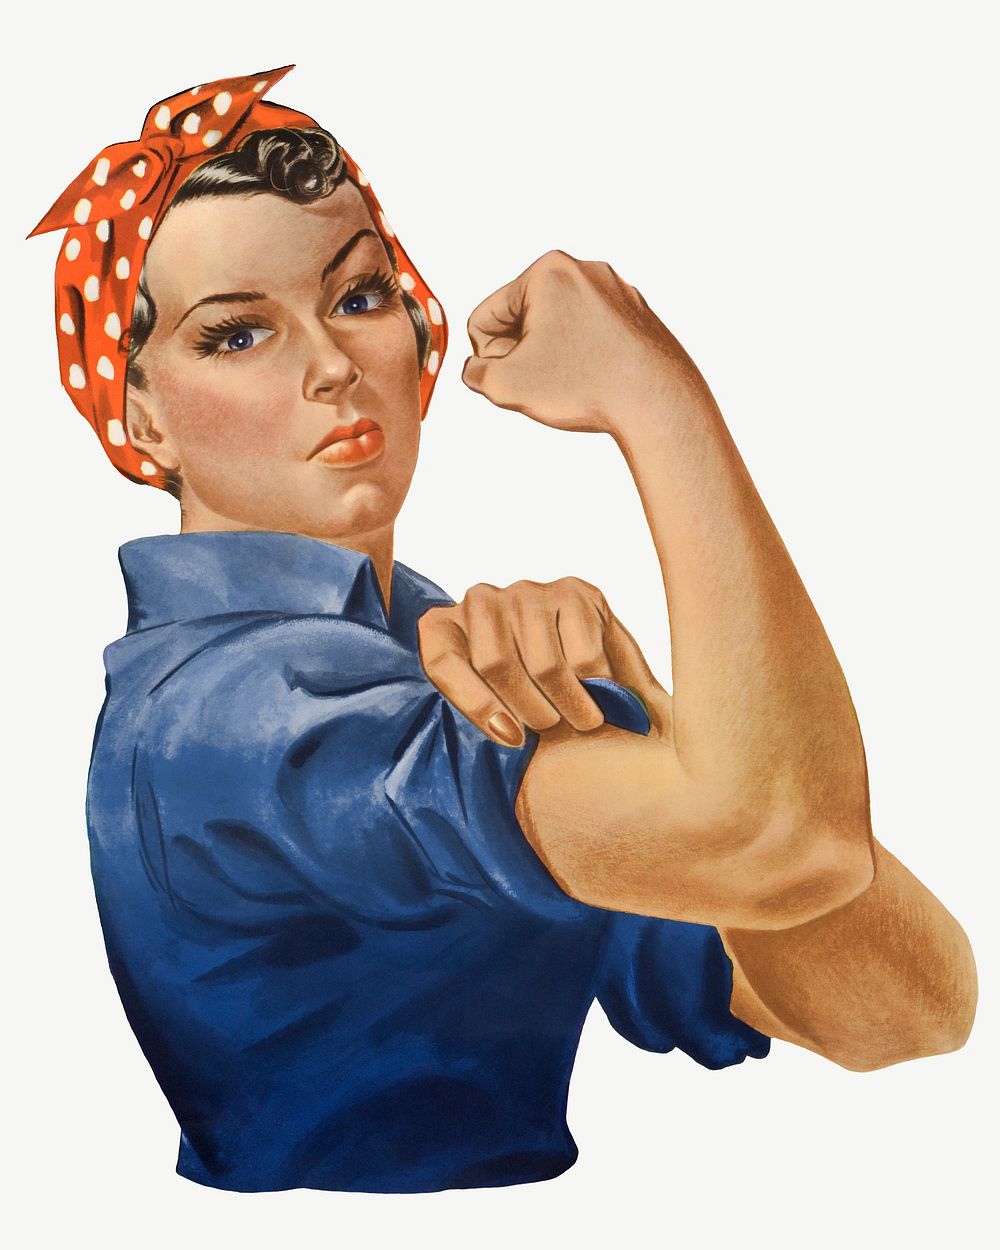 Feminism clipart psd. Original public domain image from Wikimedia Commons. Digitally enhanced by rawpixel.